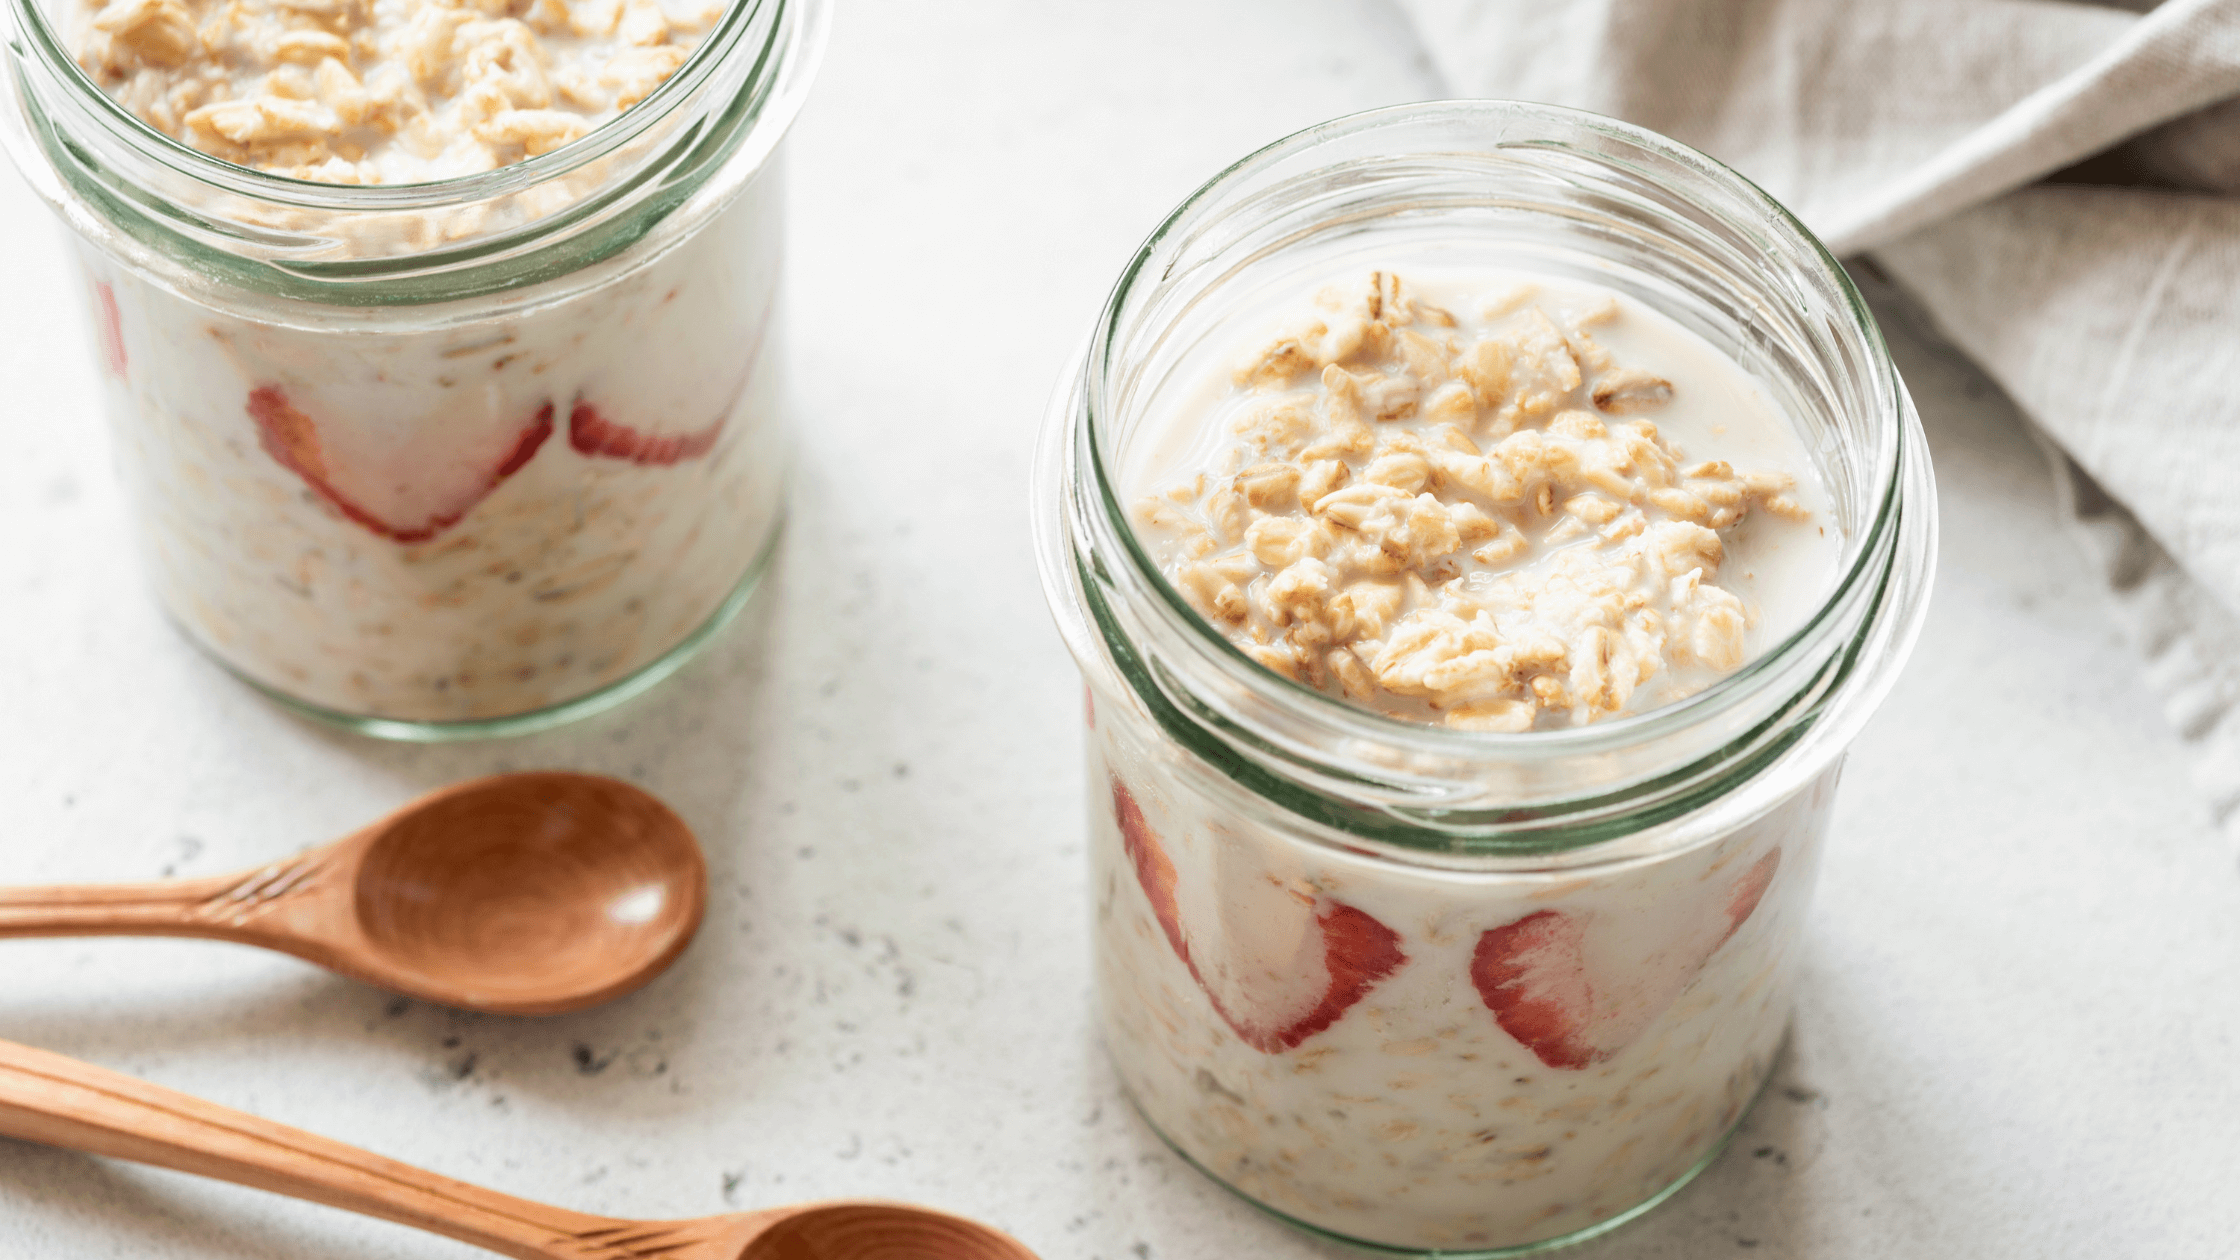 6 Simple & Insanely Delicious Overnight Oats Recipes That'll Make You Love Breakfast Again 5